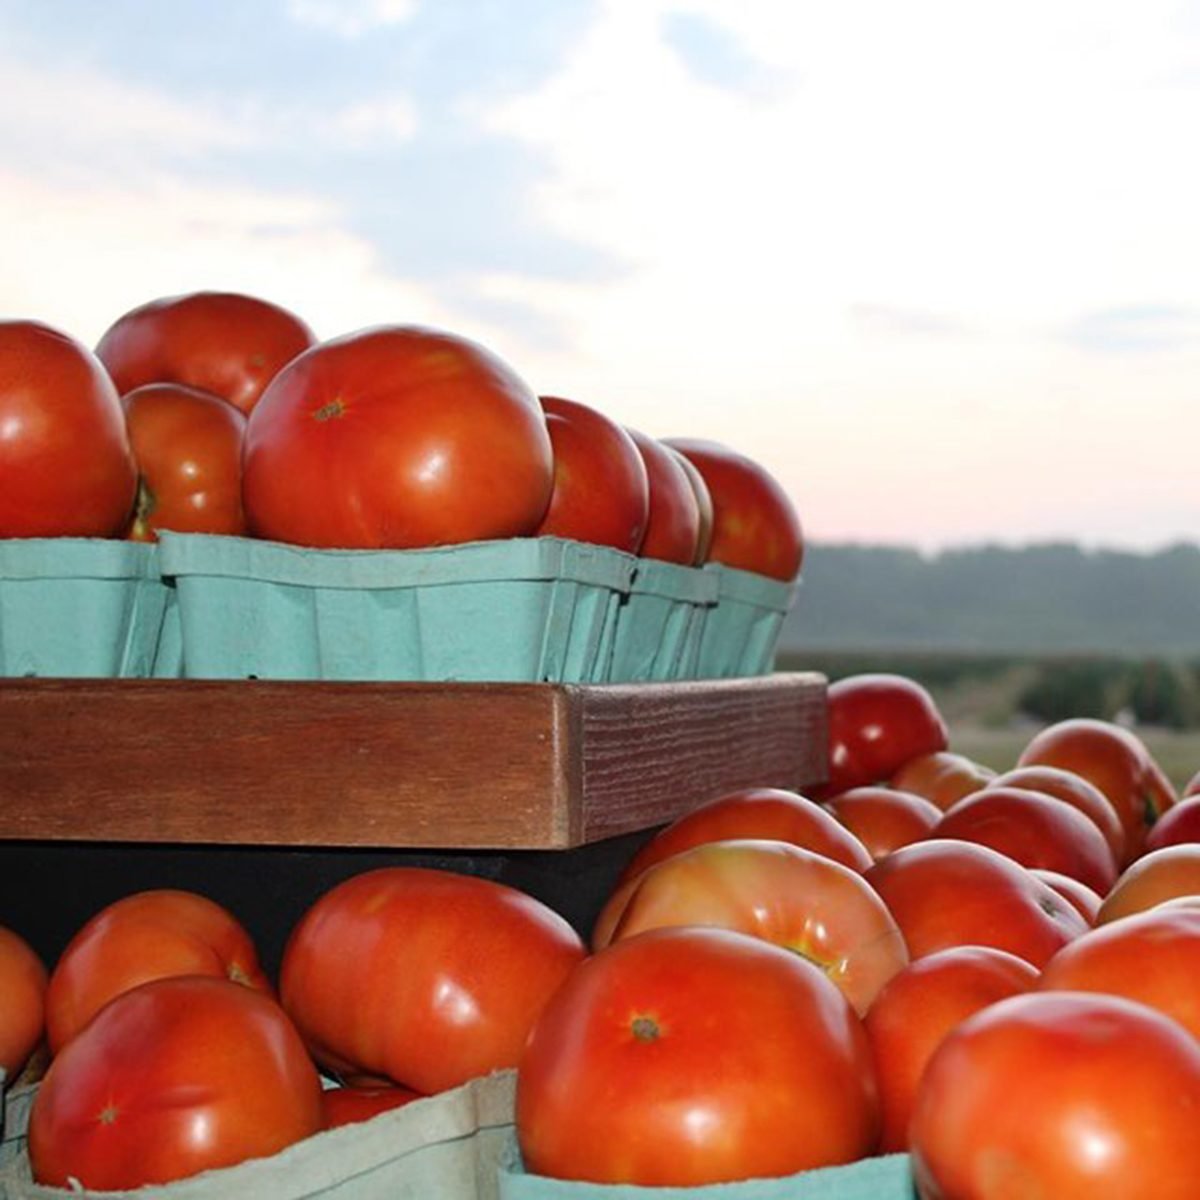 Tomatoes on shelves against a sky background